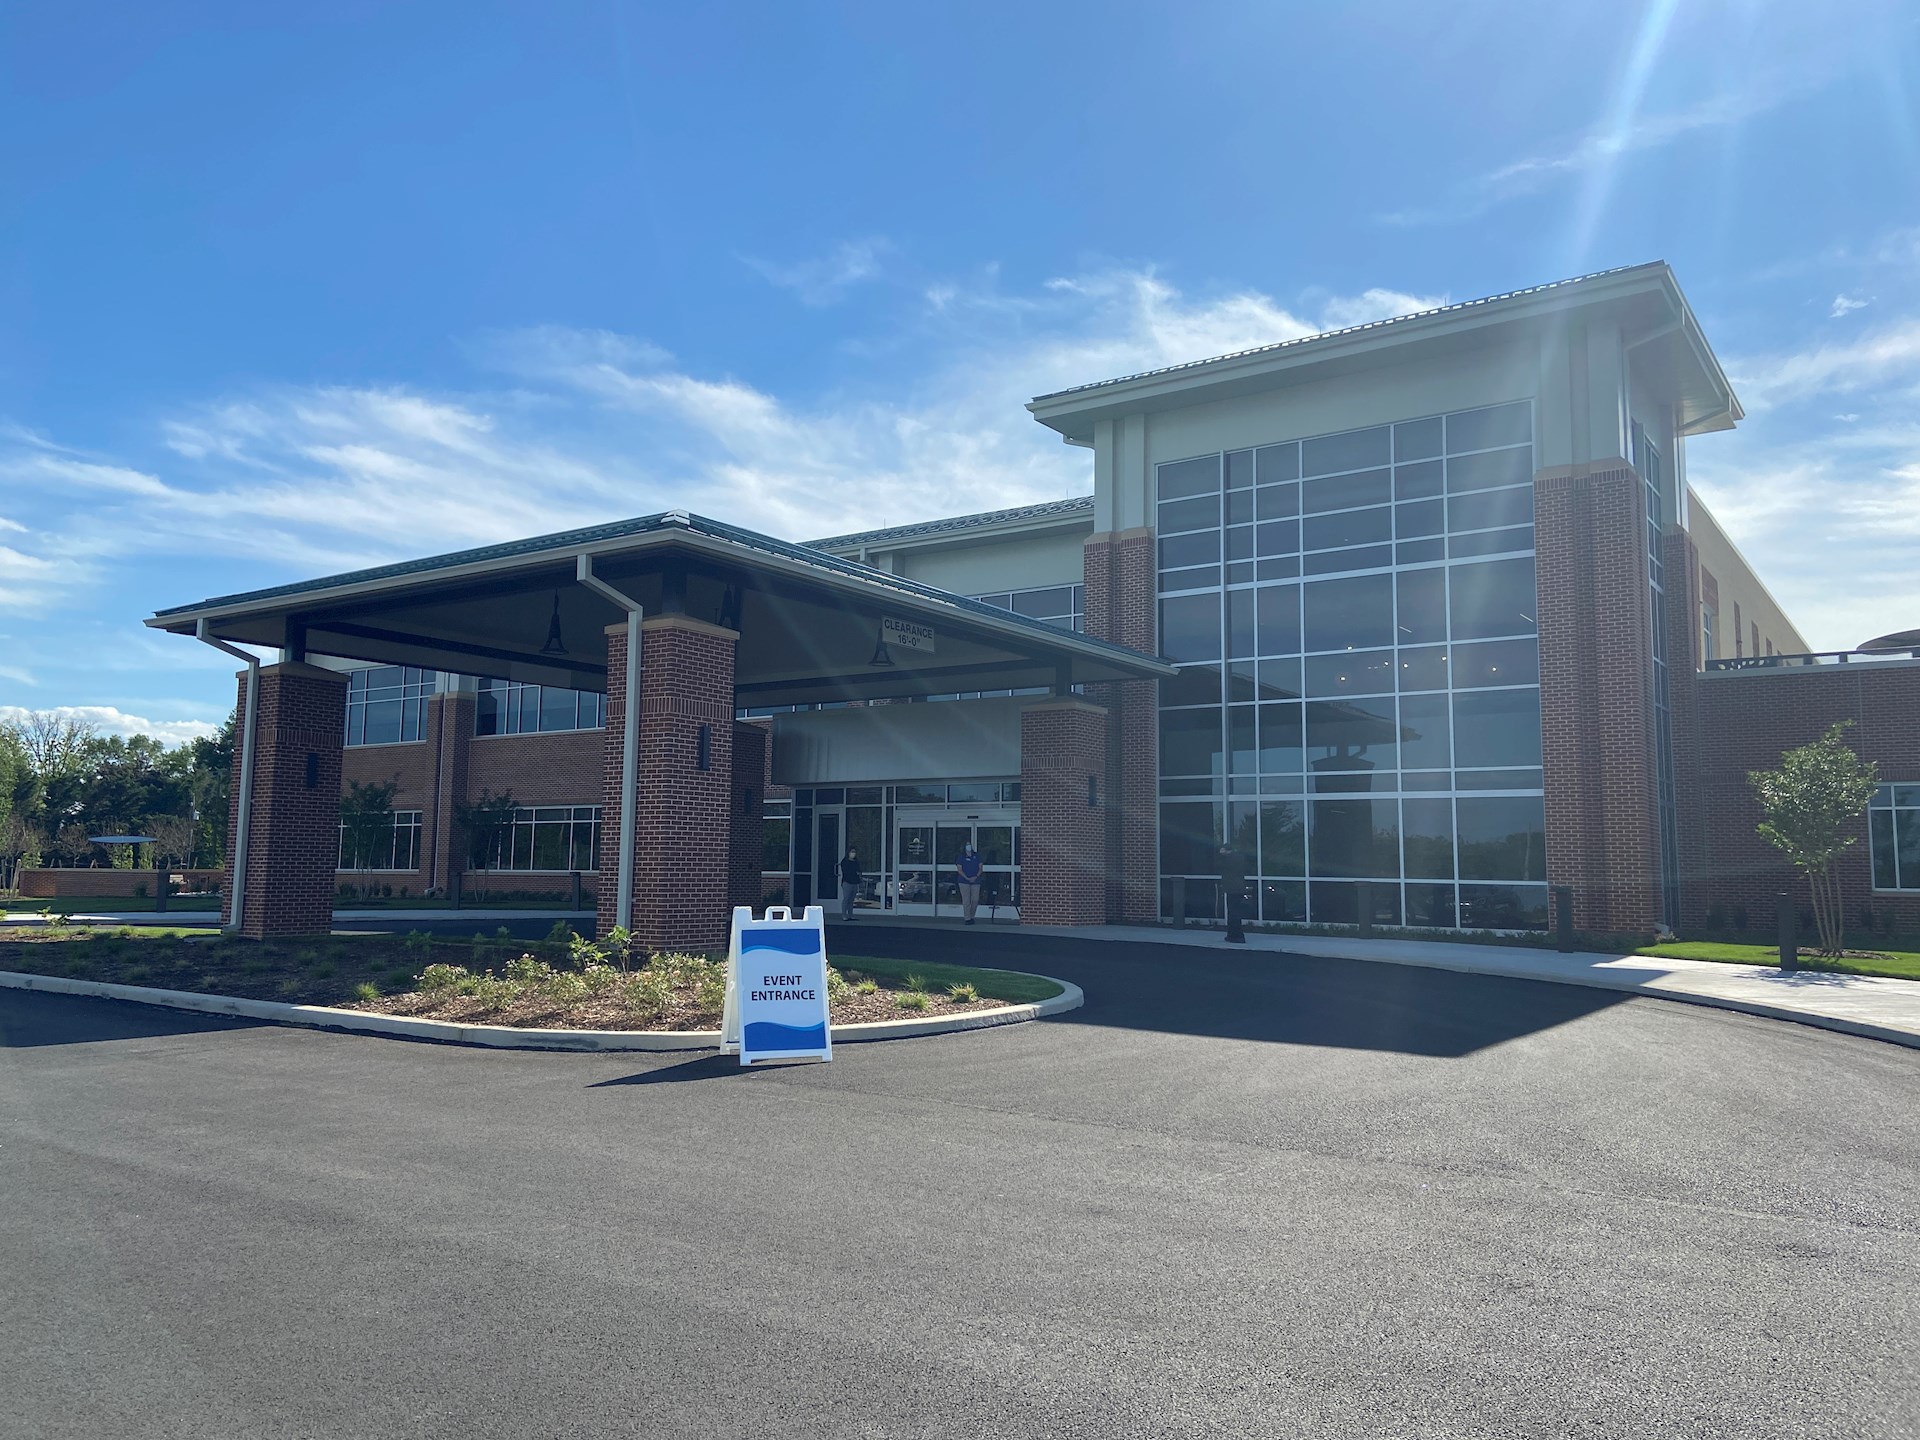 WellSpan Health opens state-of-the-art Heart & Vascular Center to provide access to comprehensive heart care in one location